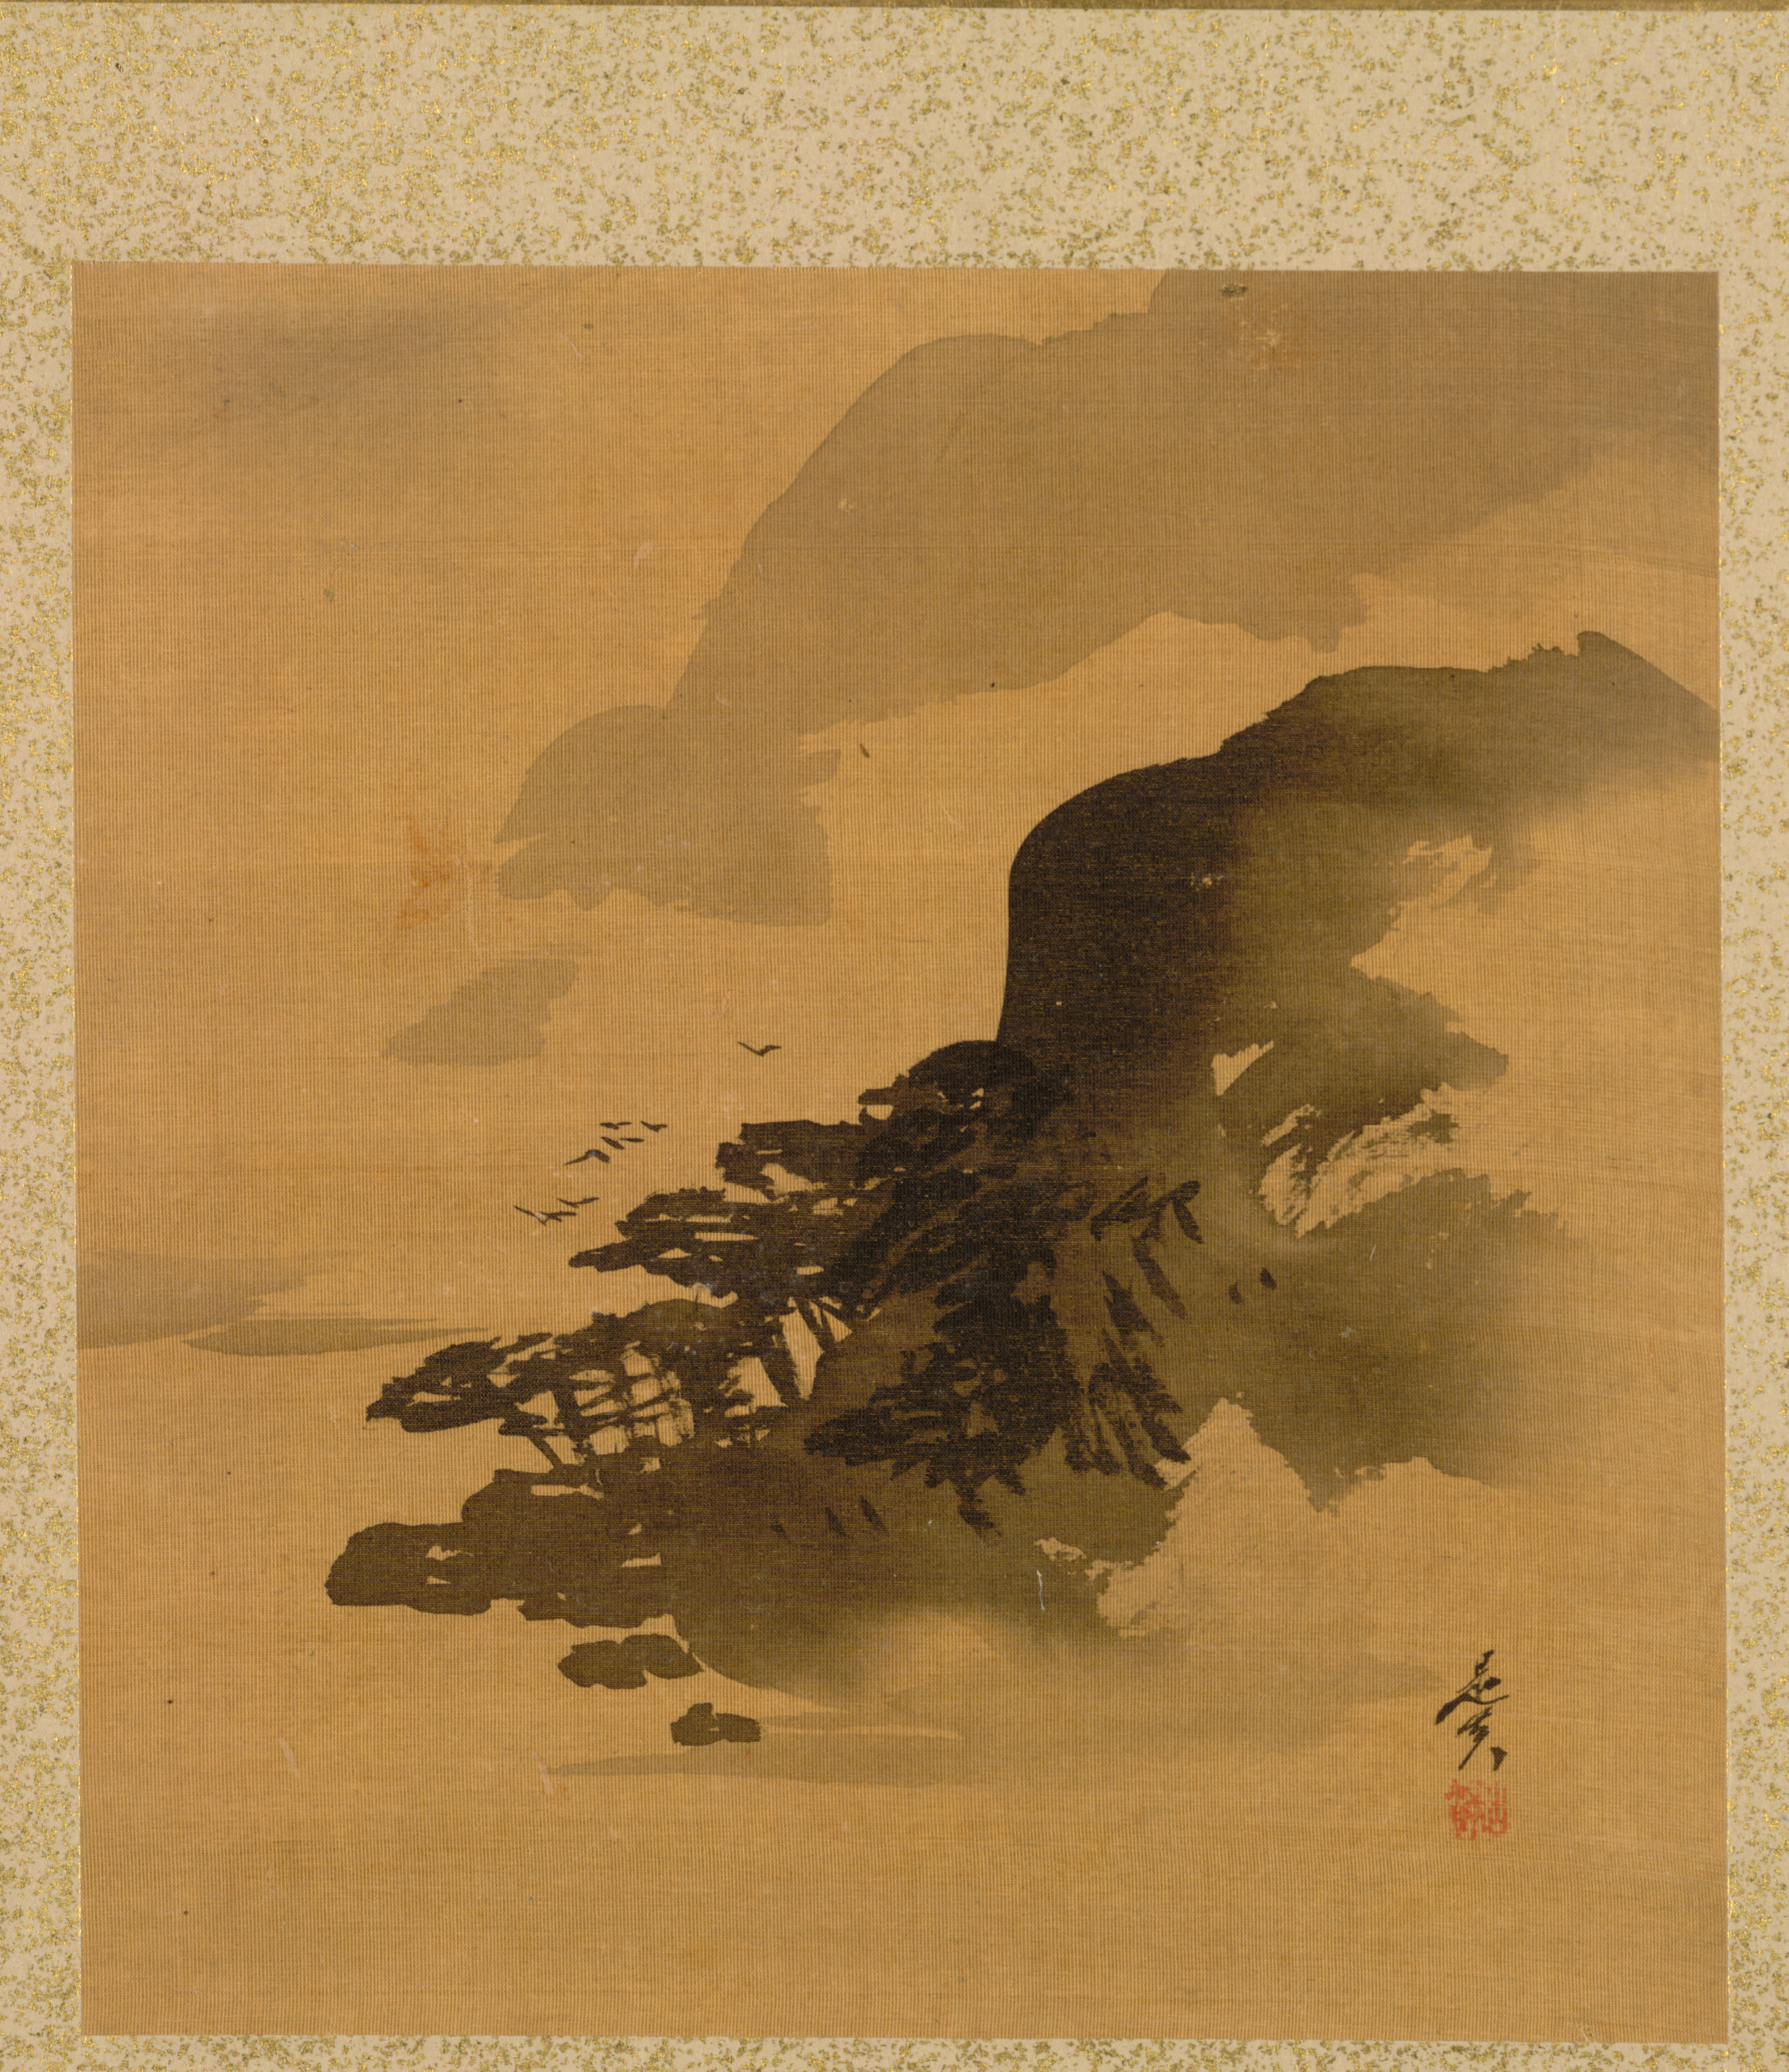 Shoreline with Birds from Album of Paintings by the Venerable Zeshin